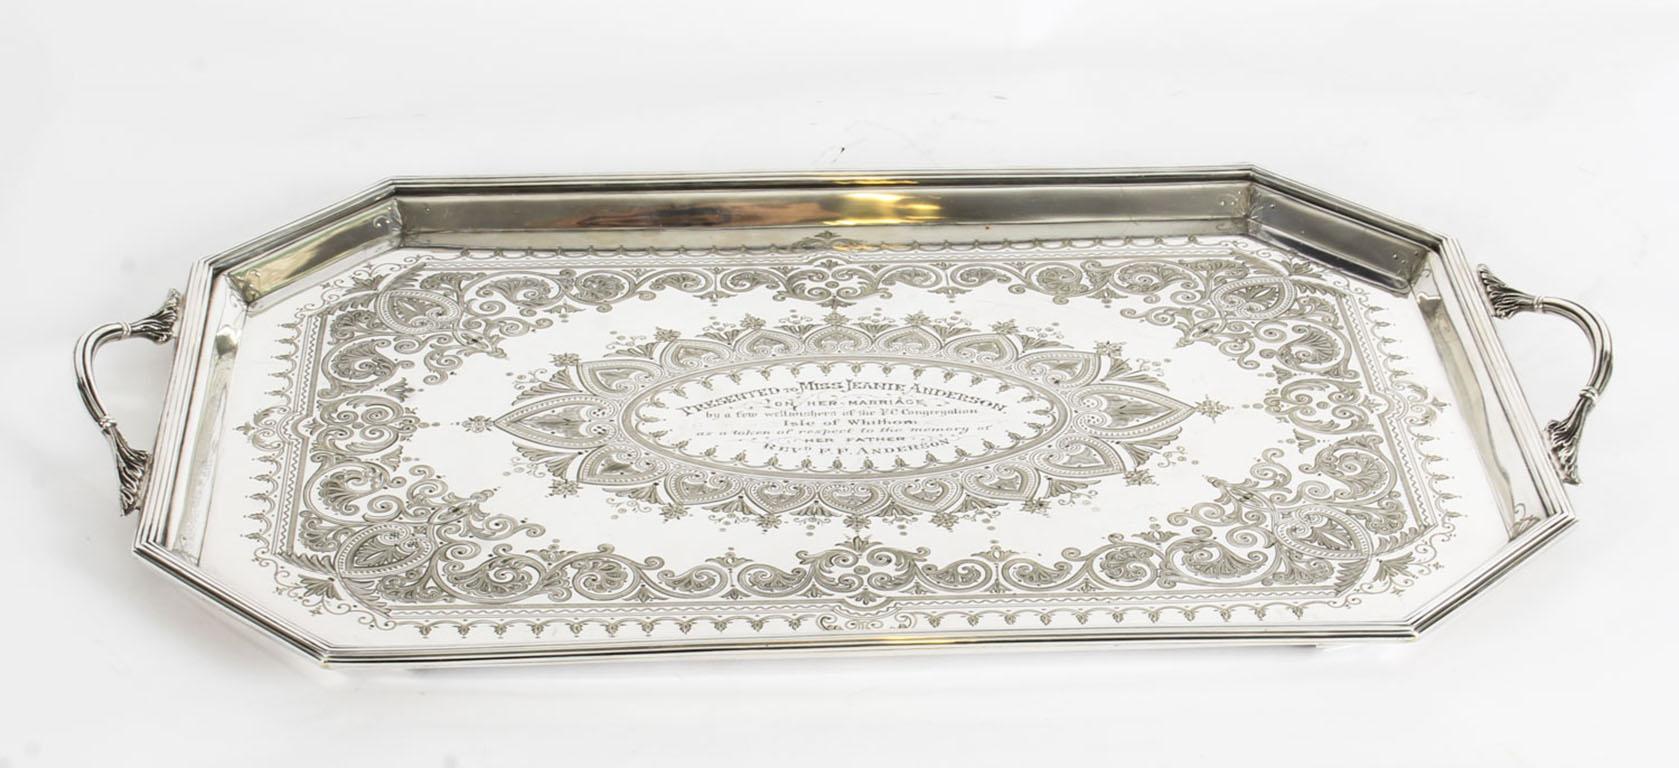 Antique Victorian Silver Plated Service Tray Thomas Latham, 19th Century 2